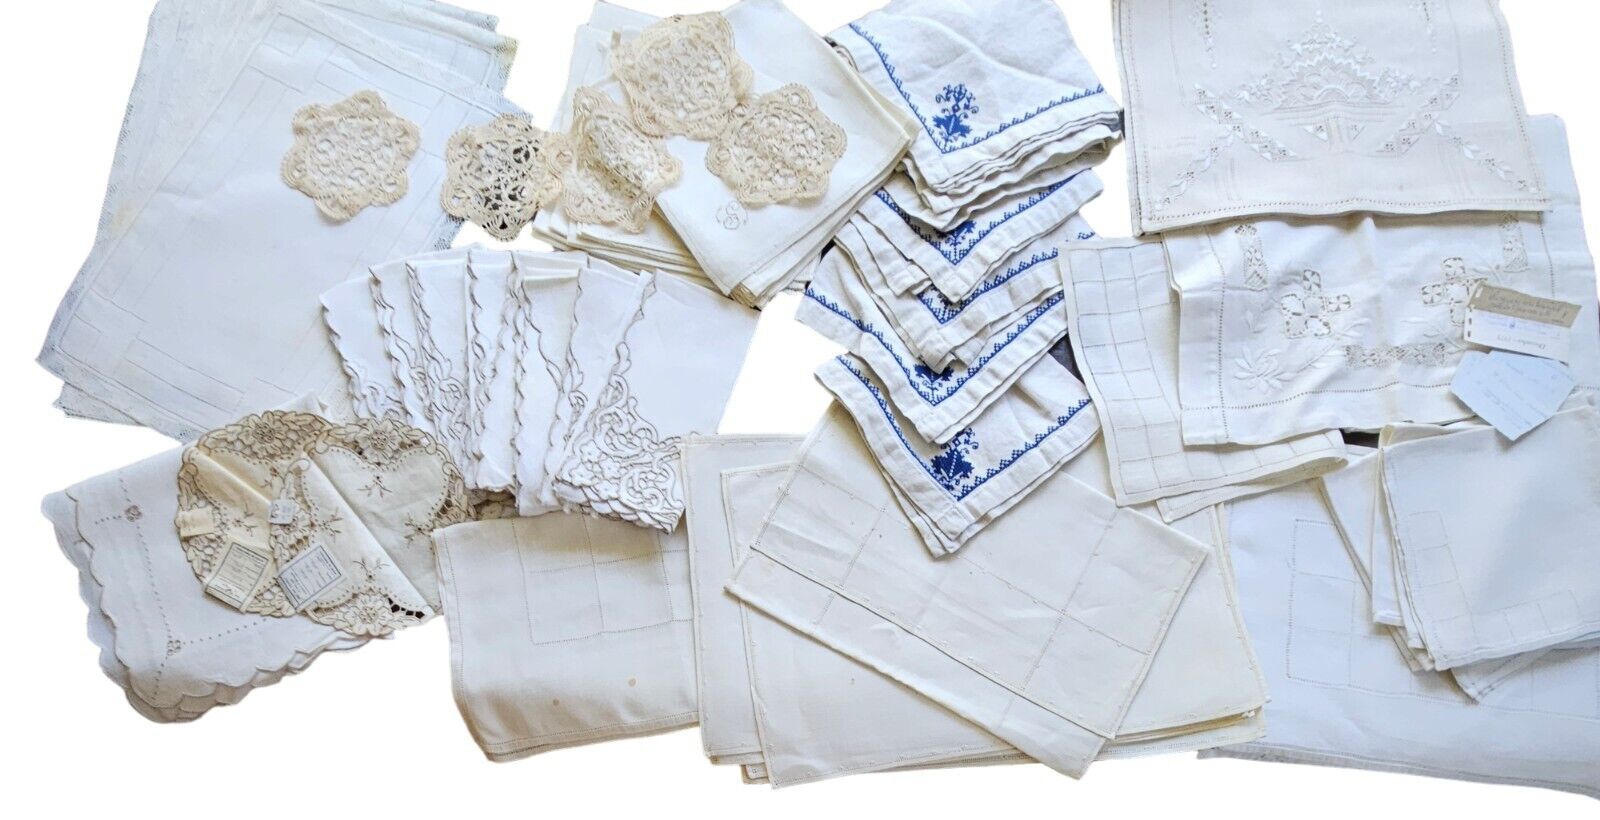 VTG Linens Large Lot Table Runner Place Mat Napkin Lace Doily Embroidered 70 Pc